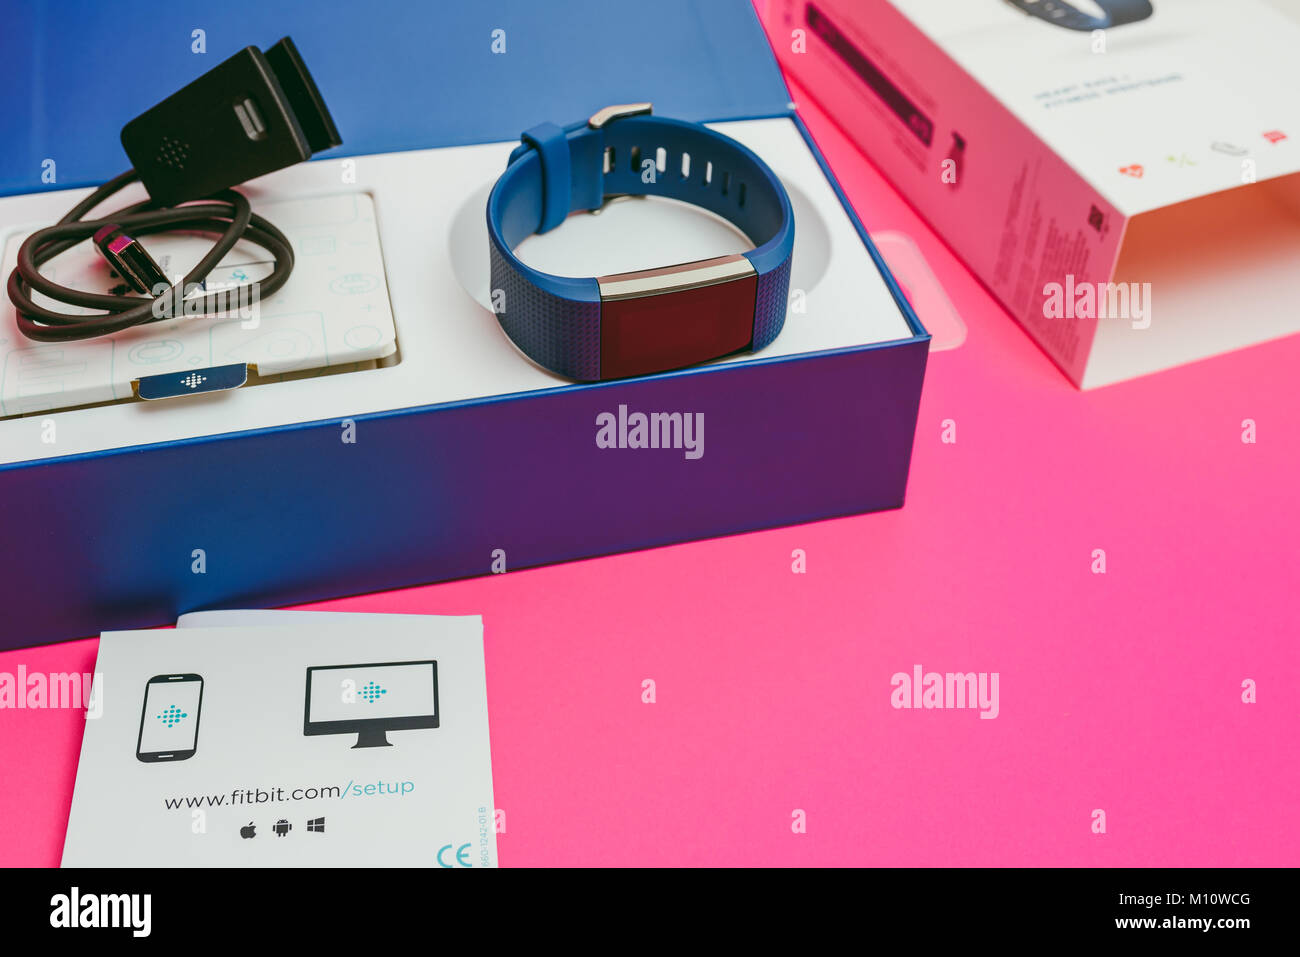 Fitbit Charge Hr High Resolution Stock Photography and Images - Alamy